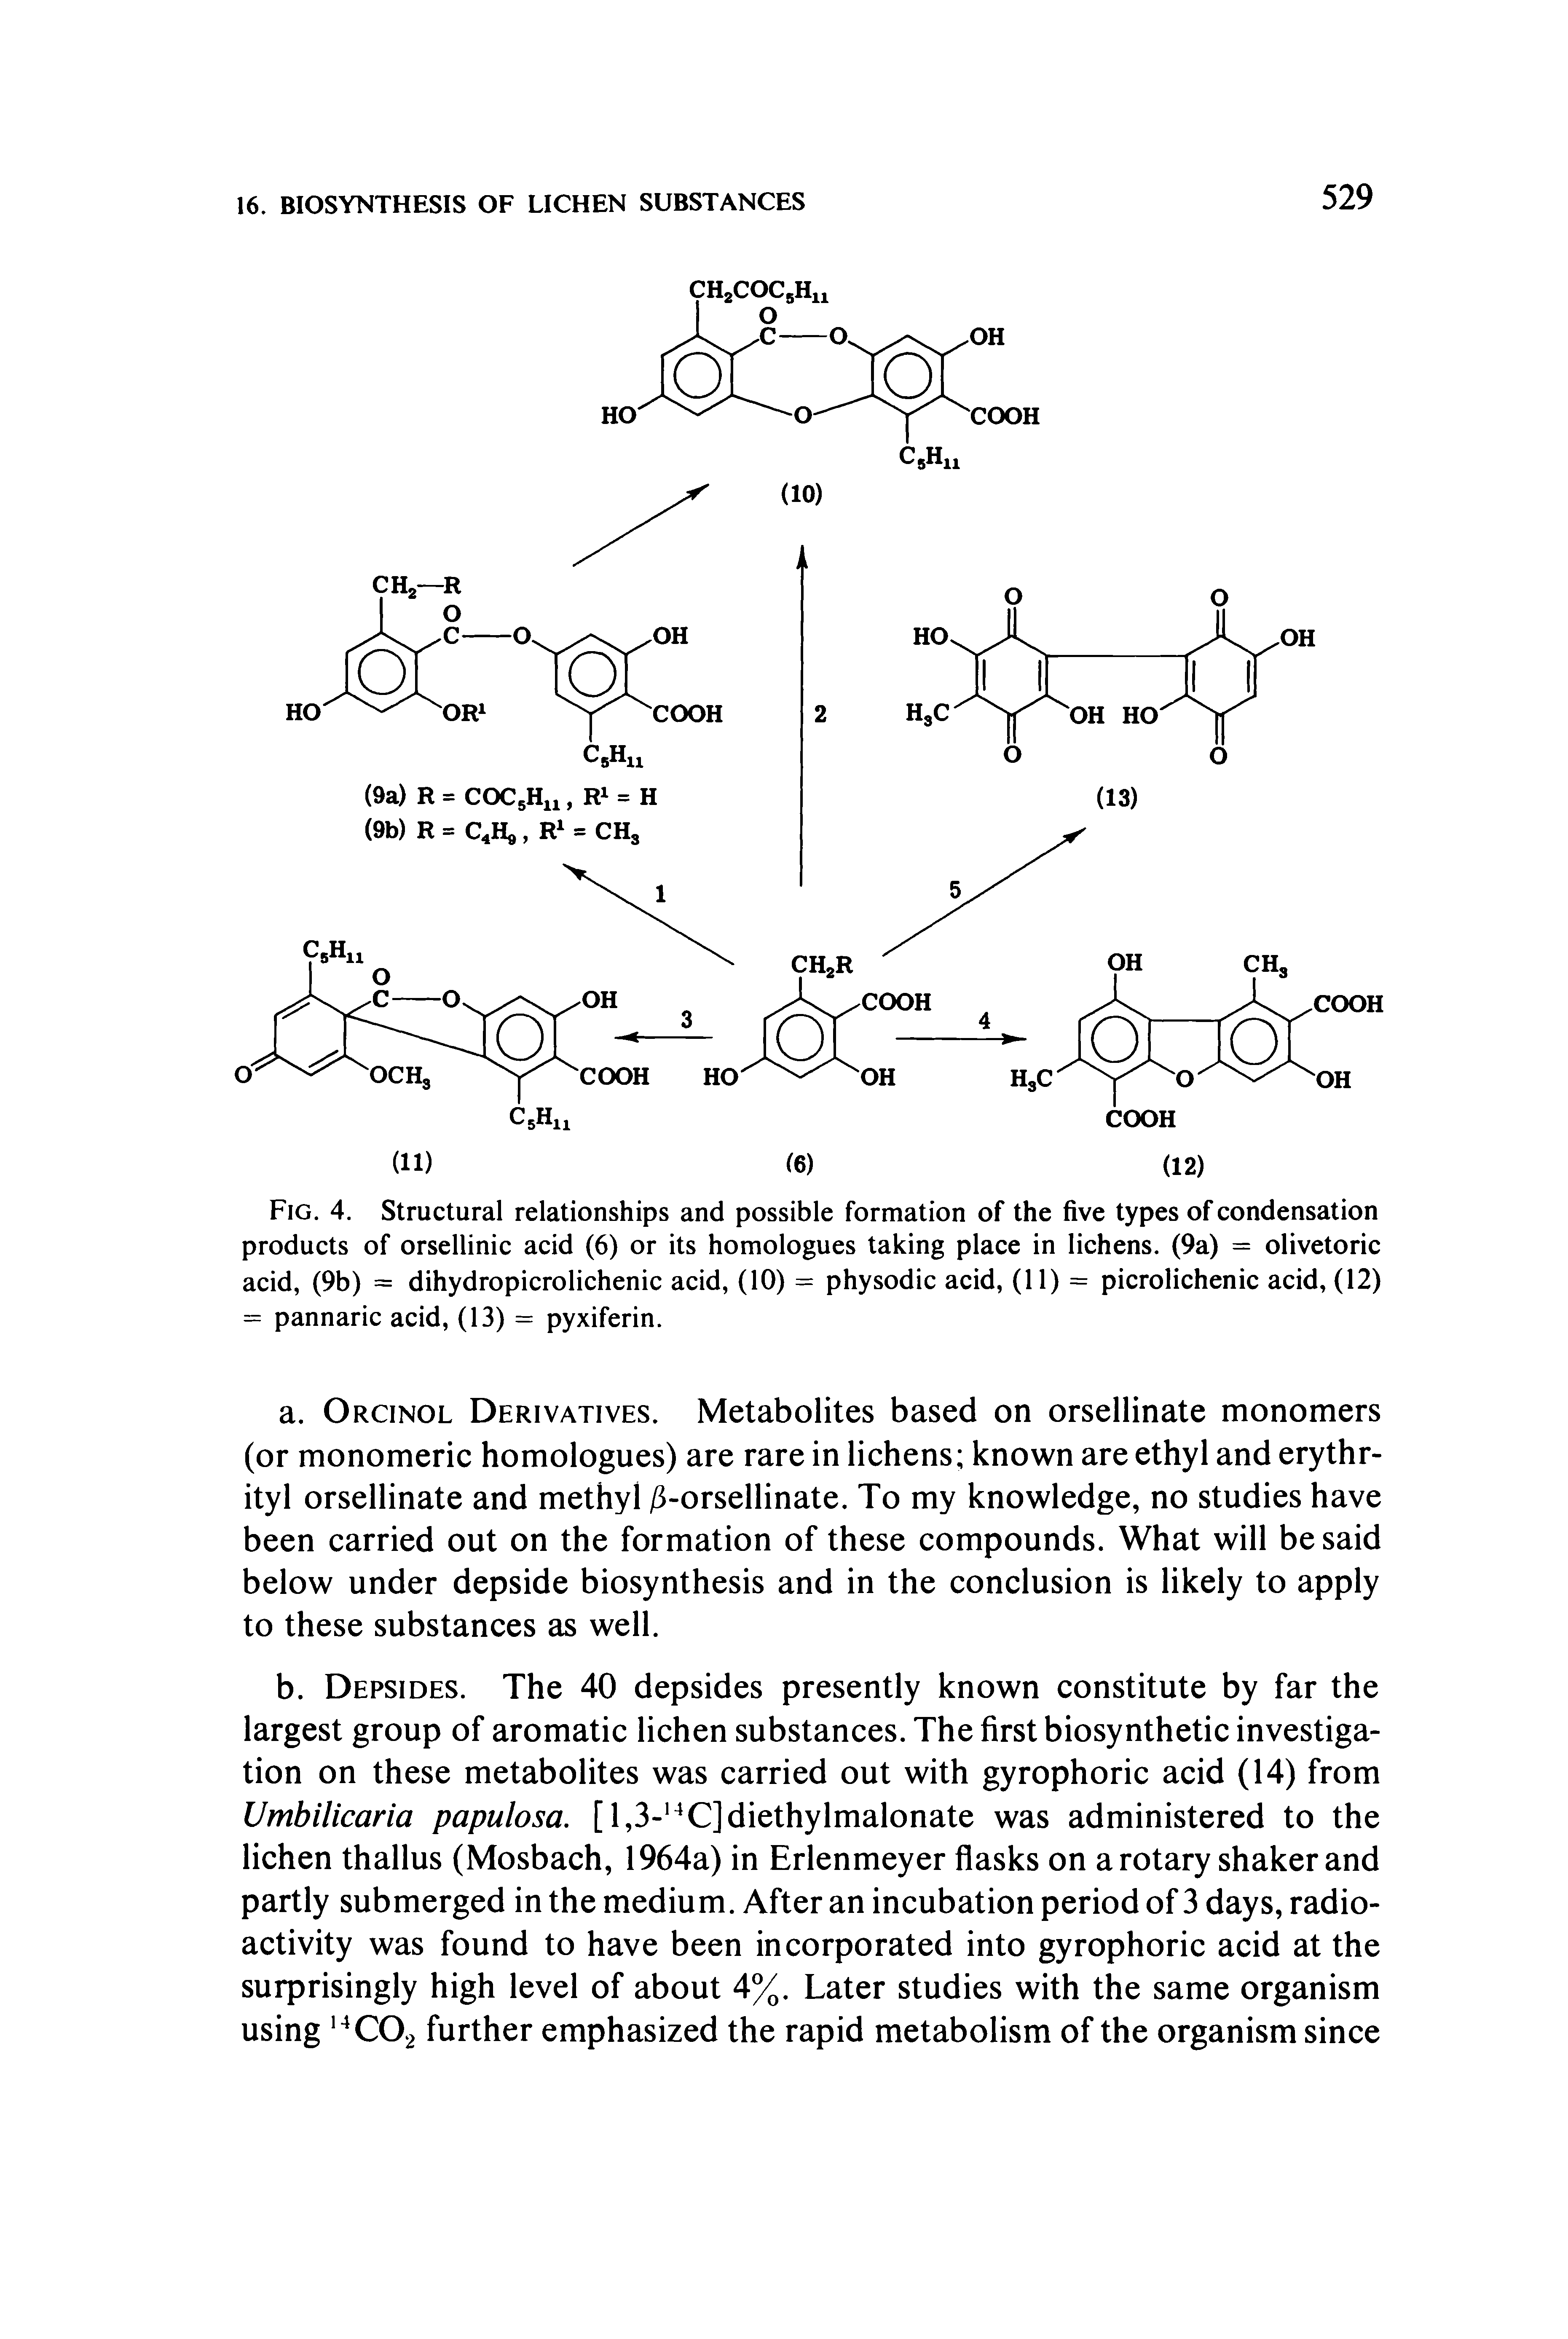 Fig. 4. Structural relationships and possible formation of the five types of condensation products of orsellinic acid (6) or its homologues taking place in lichens. (9a) = olivetoric acid, (9b) = dihydropicrolichenic acid, (10) = physodic acid, (11) = picrolichenic acid, (12) = pannaric acid, (13) = pyxiferin.